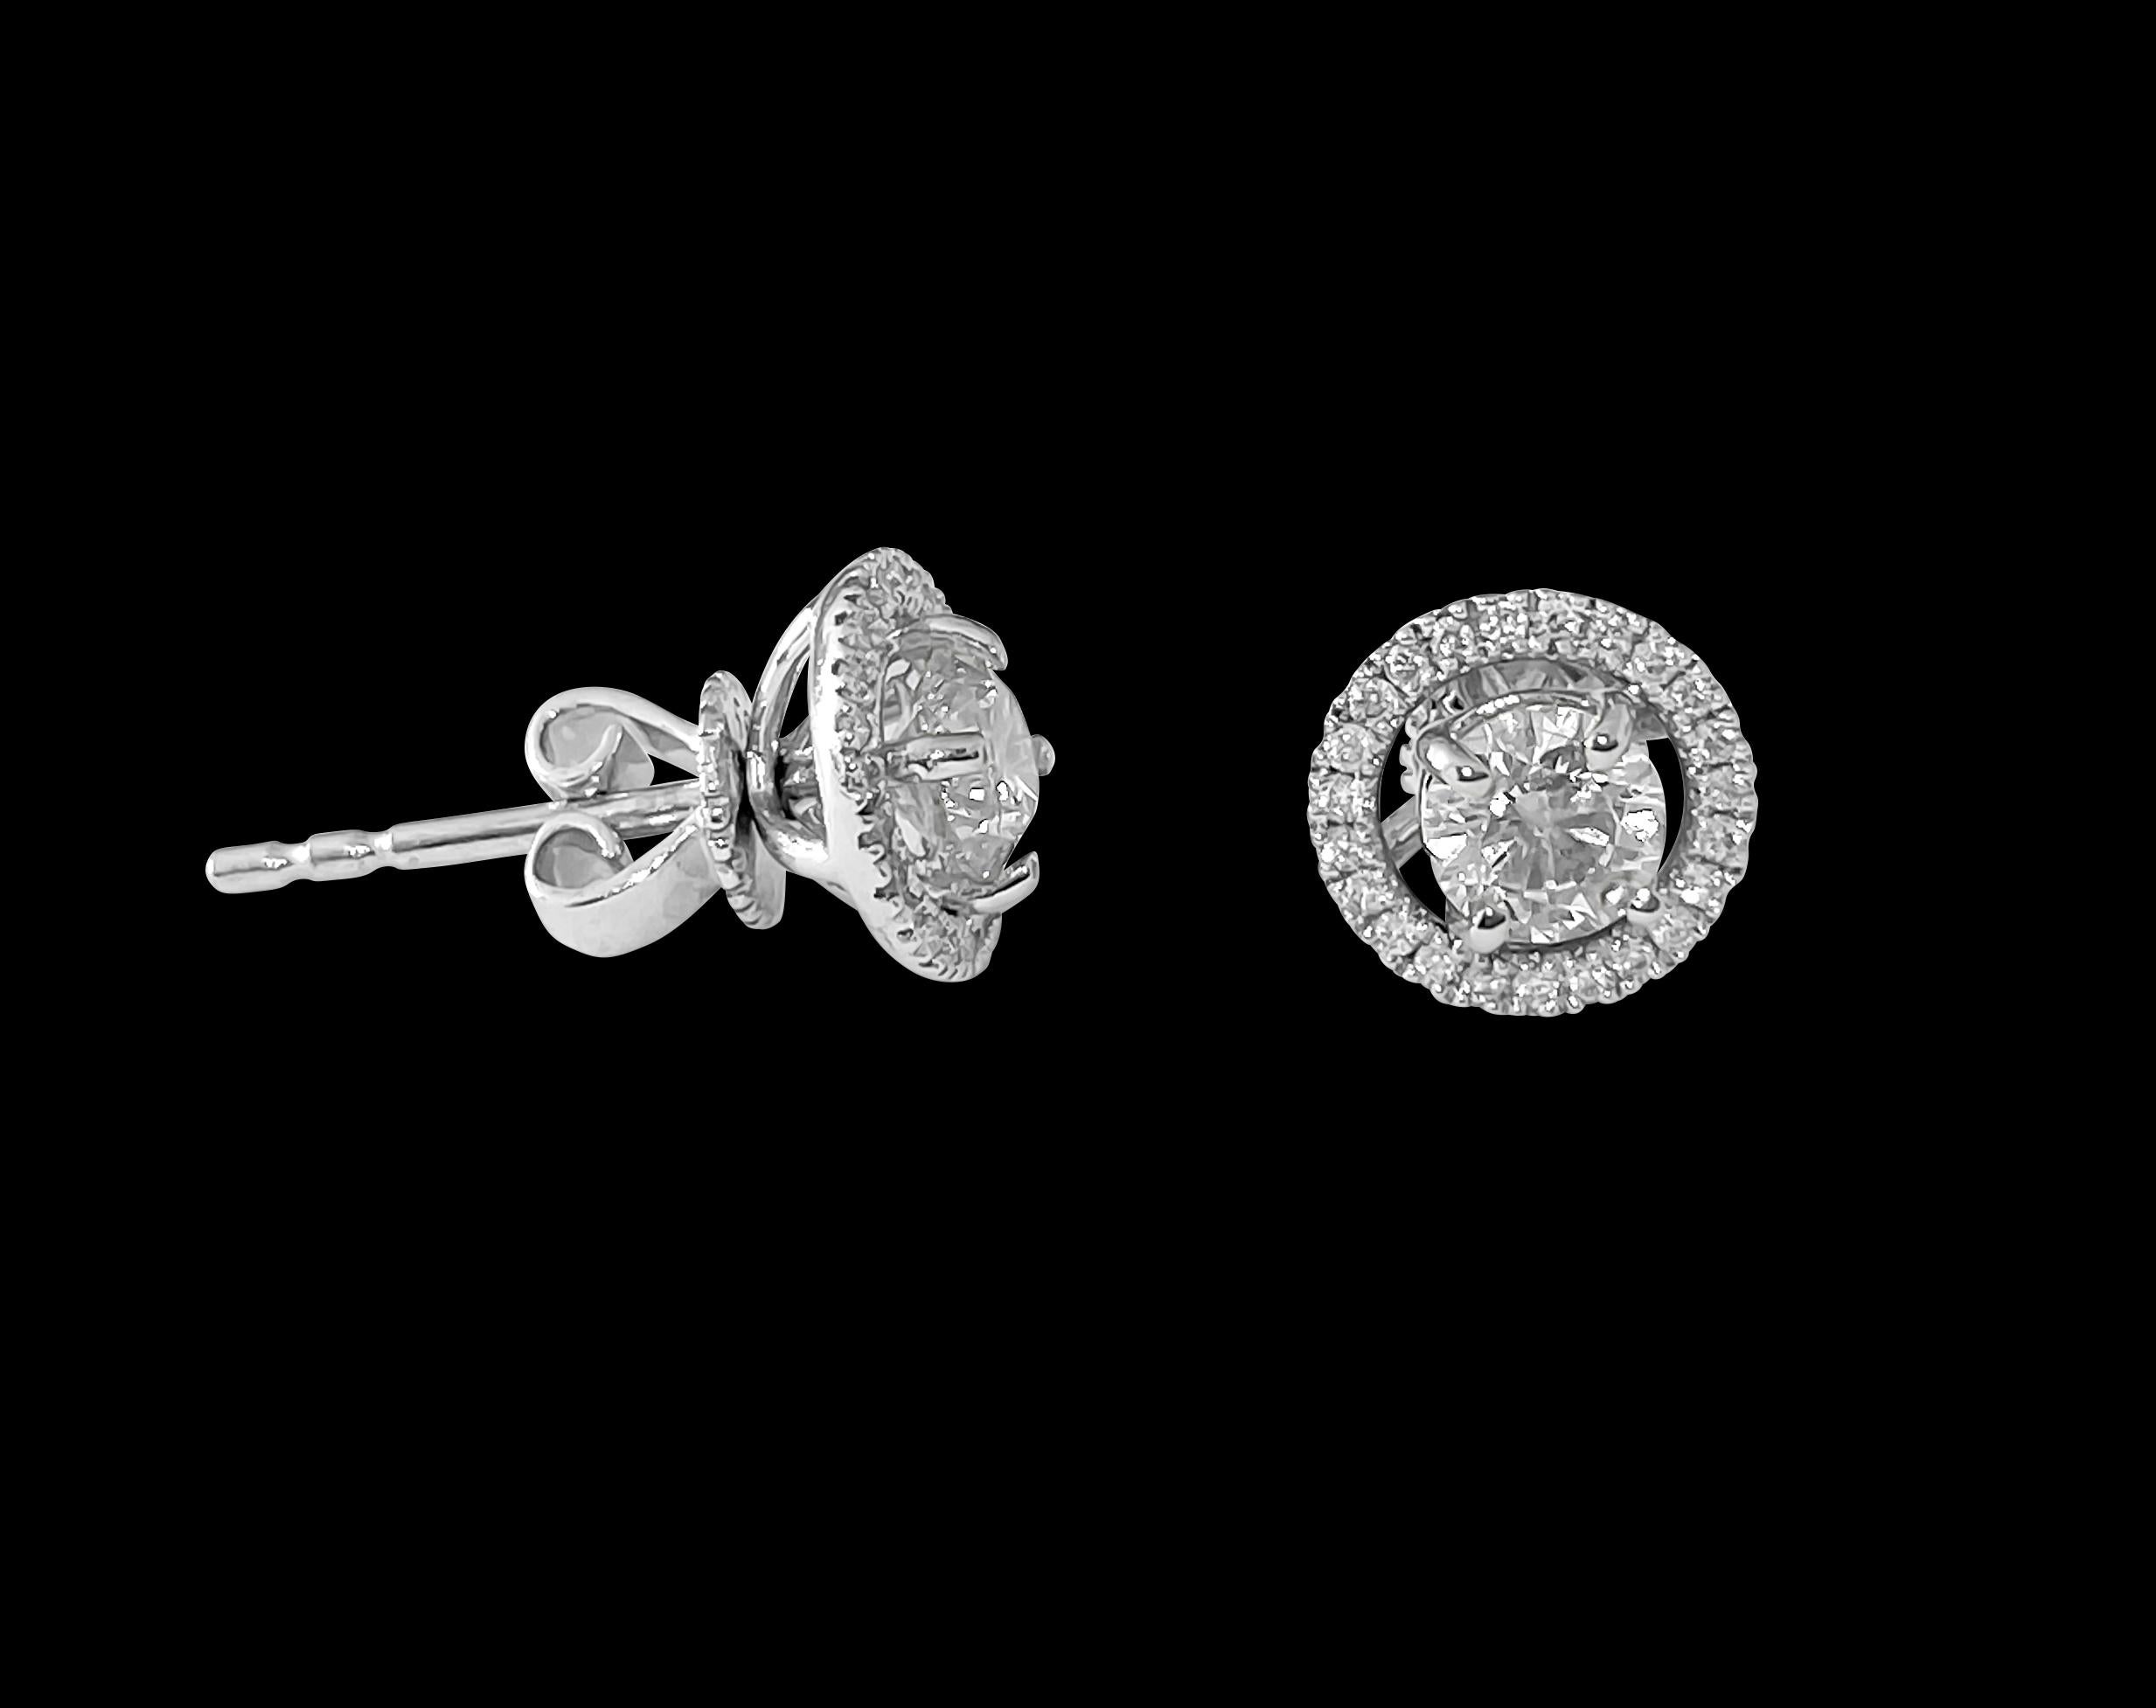 Metal: 18K white gold. 
Side diamonds: 0.30 carats. 
Center diamonds: 0.50 carats. Total carat weight of diamonds: 0.80 carats. 
Clarity: SI. Color: G. Round brilliant cut diamonds set in prongs. 

These are special jacket earrings. Transform your